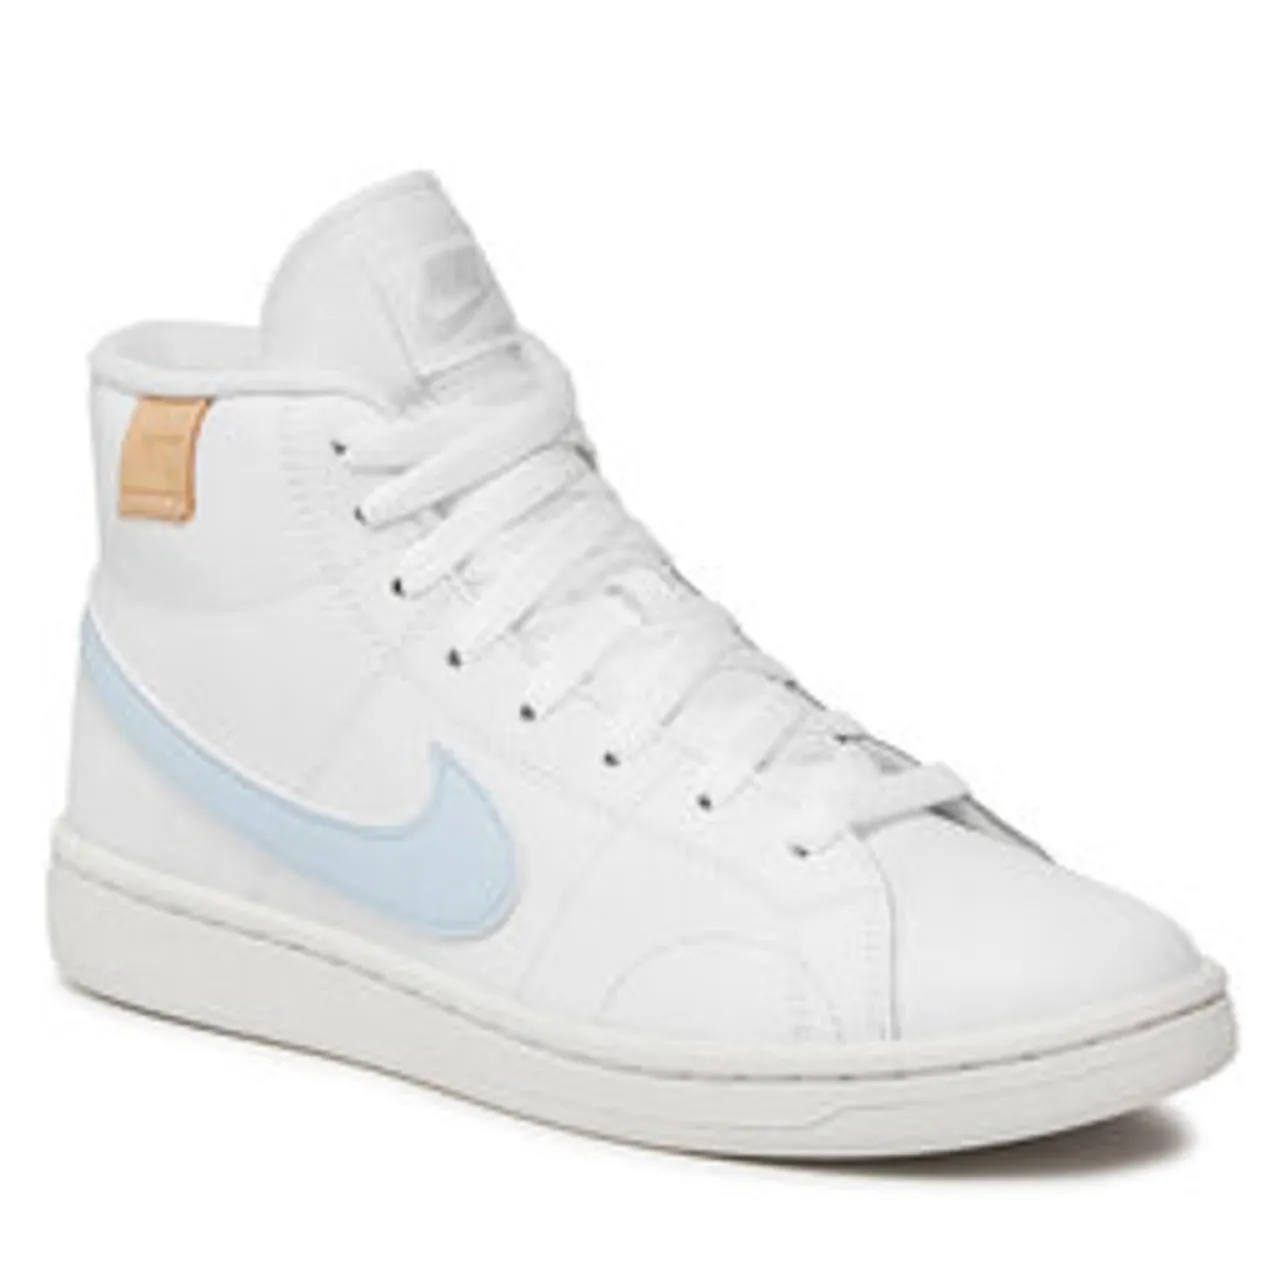 Sneakers Nike Court Royale 2 Mid CT1725 106 Weiß